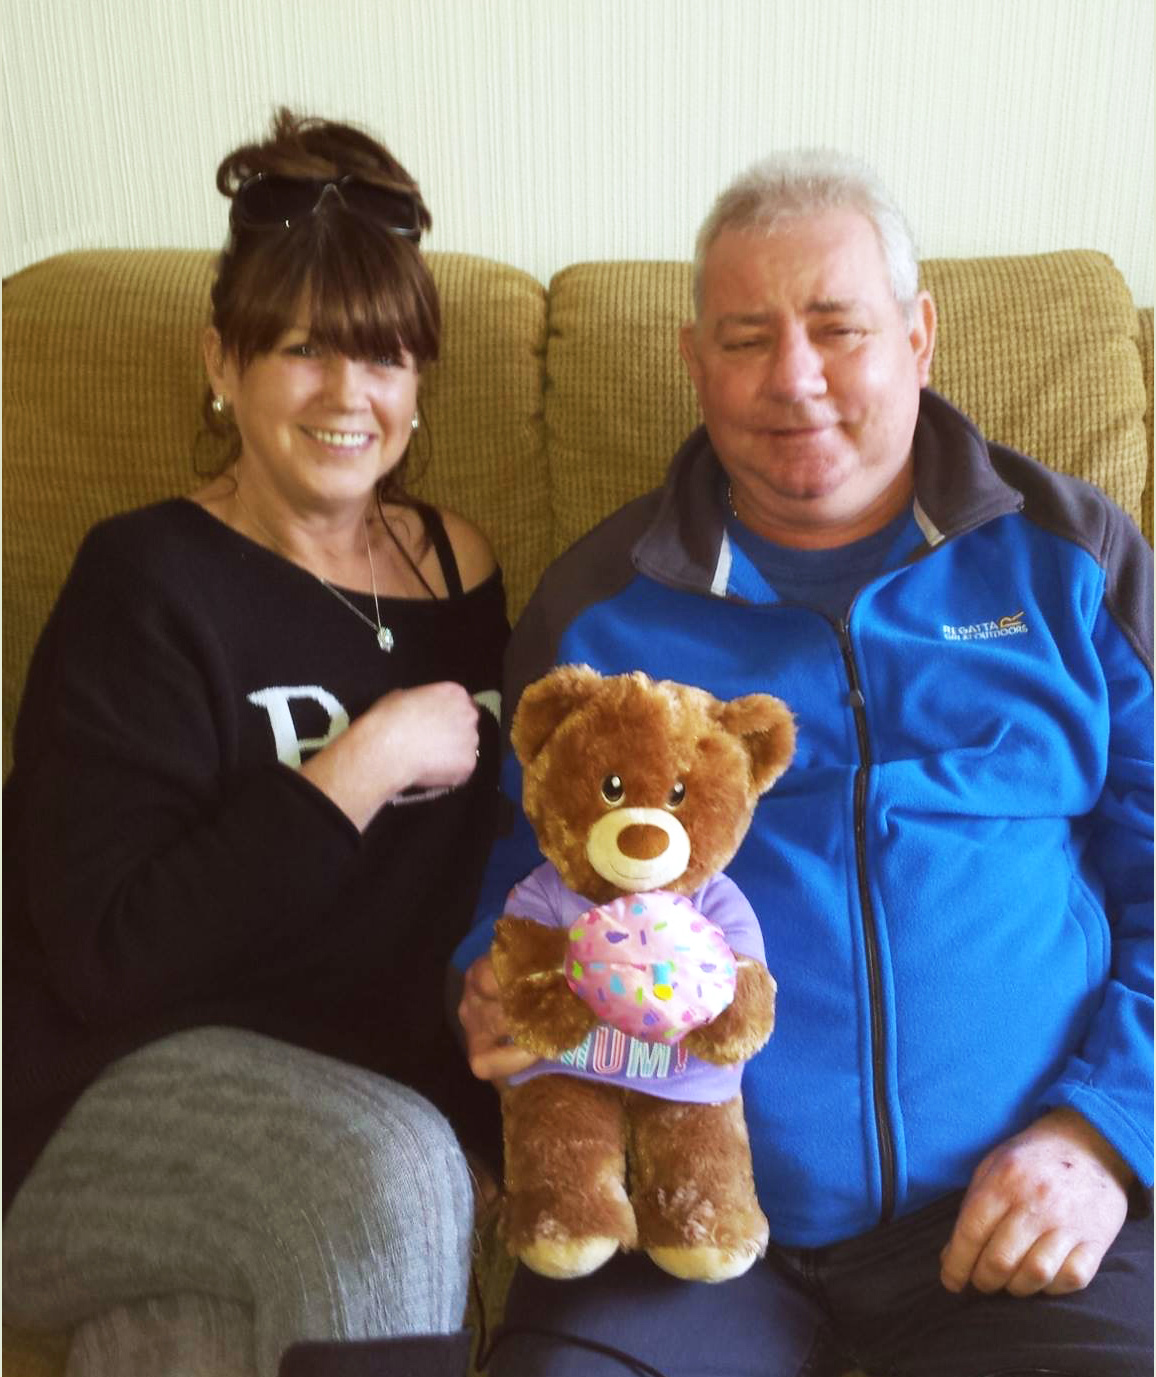 Den, the recipient of Jack's heart, gives Dona a teddy bear with the recording of Jack's heartbeat inside.